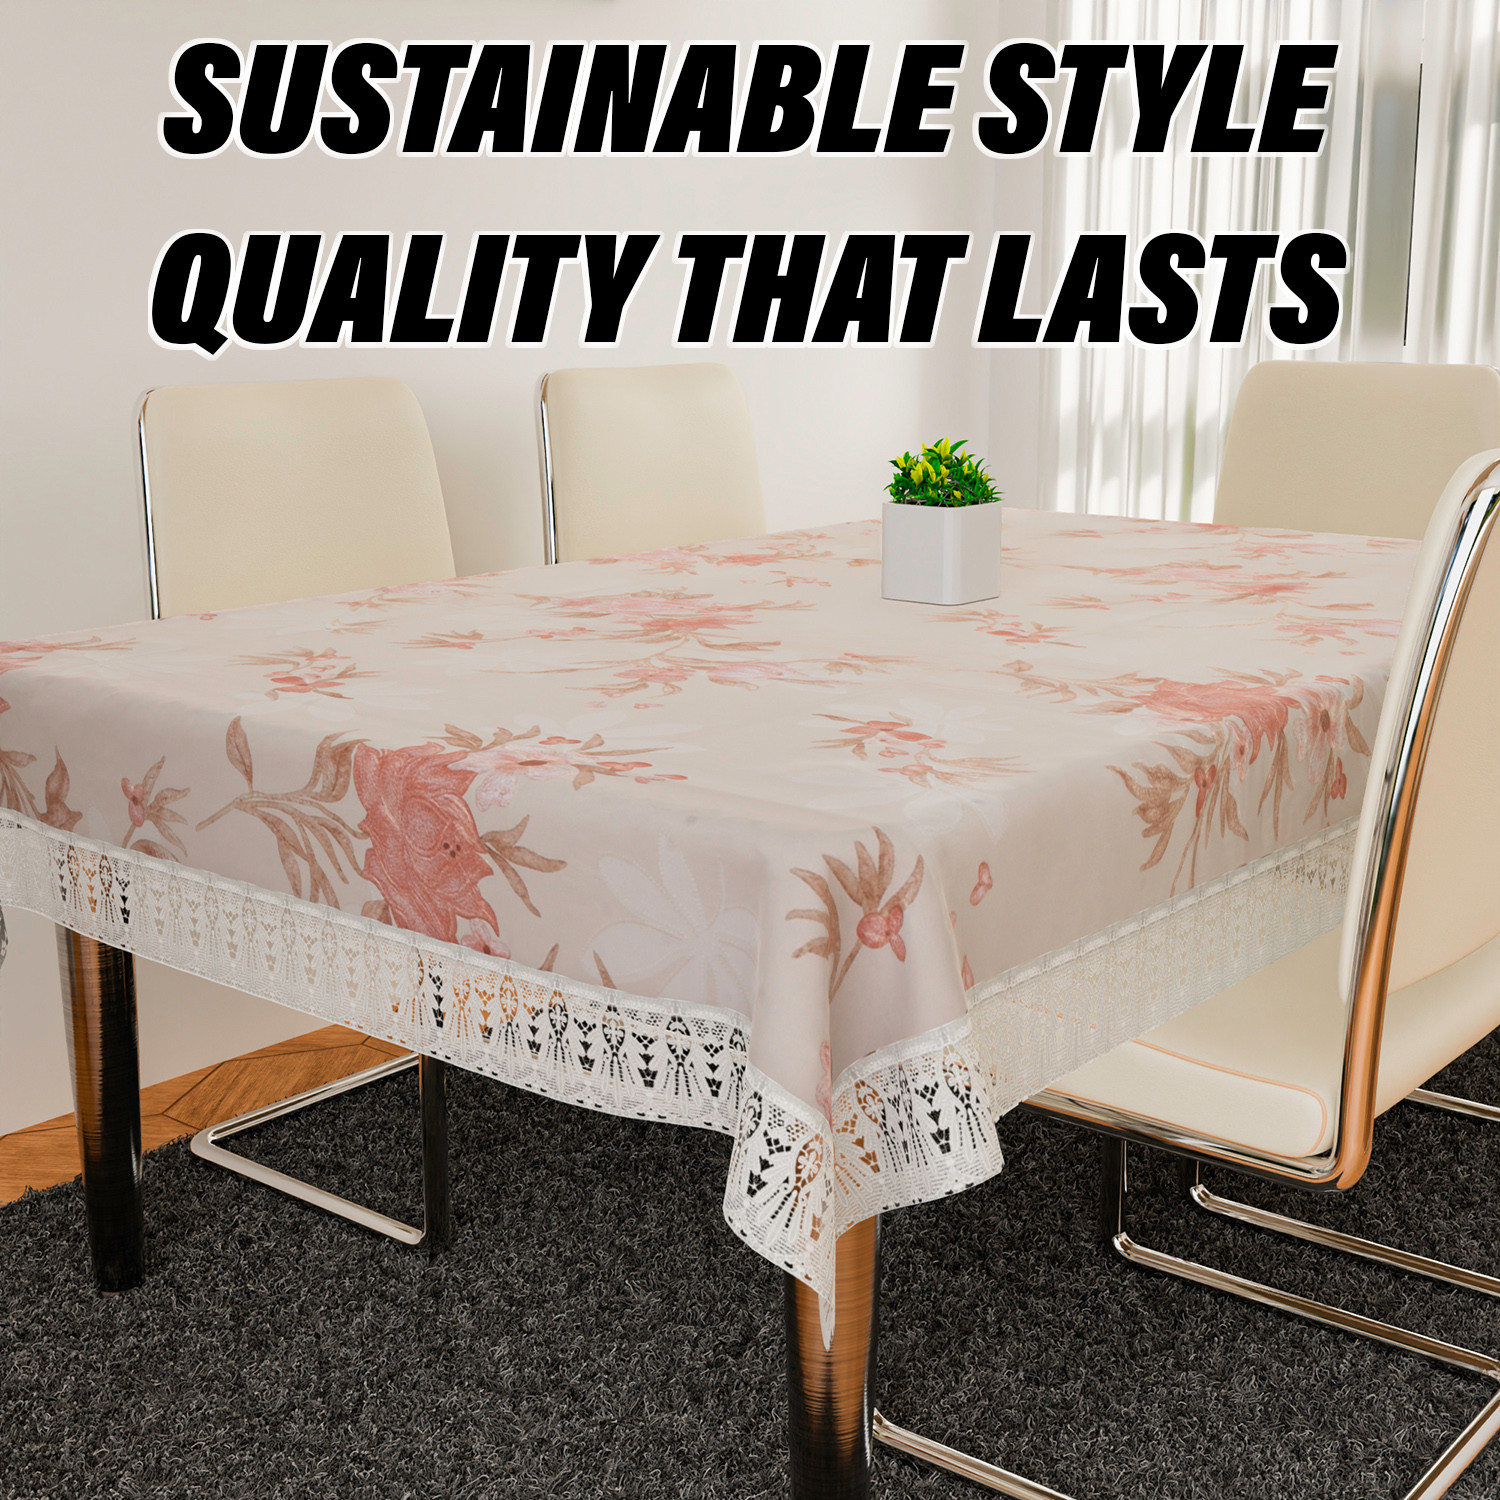 Kuber Industries Dining Table Cover | Heavy PVC Table Cloth Cover | 6 Seater Table Cloth | Red Flower Table Cover | Table Protector | Table Cover for Dining Table | 60x90 Inch | DTC | Cream